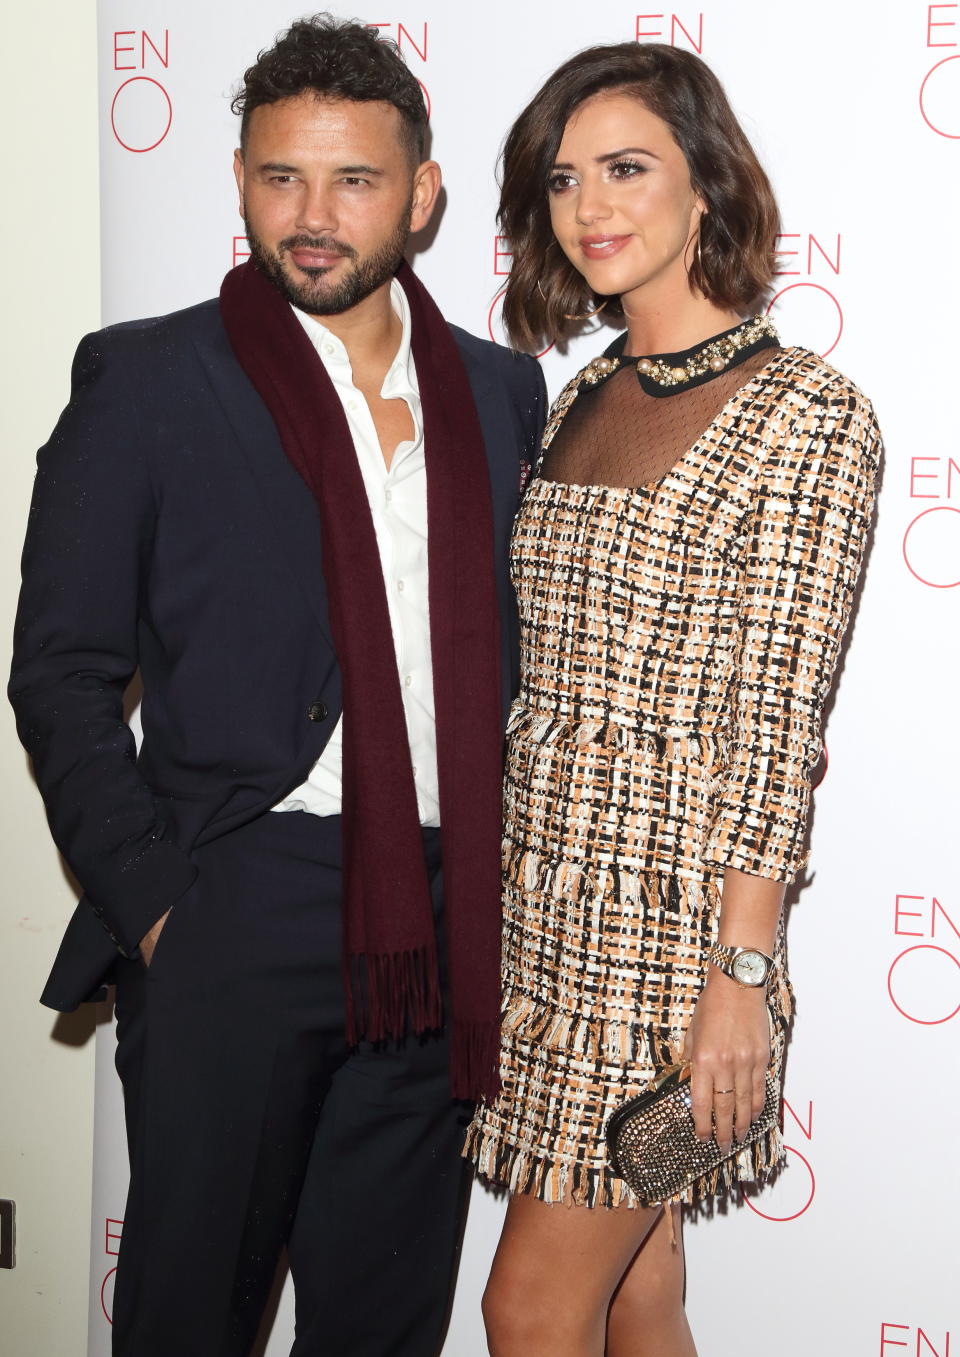 LONDON, UNITED KINGDOM - 2019/01/29: Ryan Thomas and Lucy Mecklenburgh attends the La Boheme Press Night at The Coliseum. (Photo by Keith Mayhew/SOPA Images/LightRocket via Getty Images)